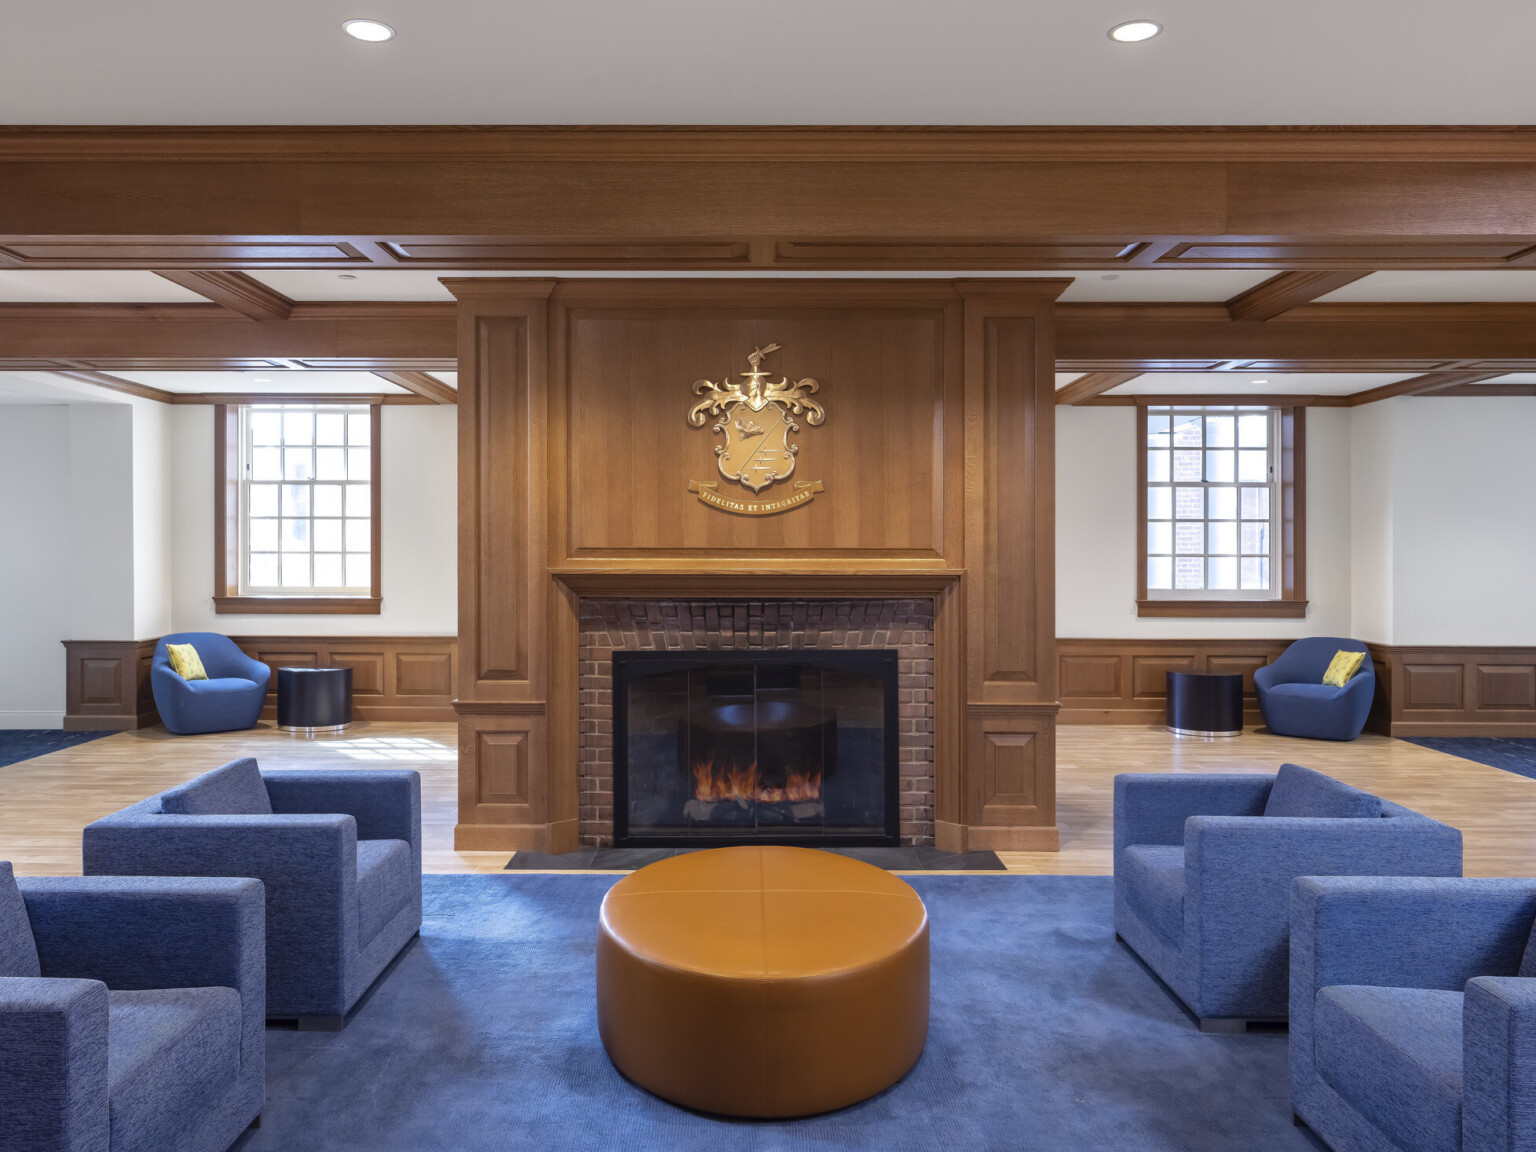 Blue armchair and ottoman in common room seating area in front of fireplace, coat of arms on mantle, large windows, coffered ceiling